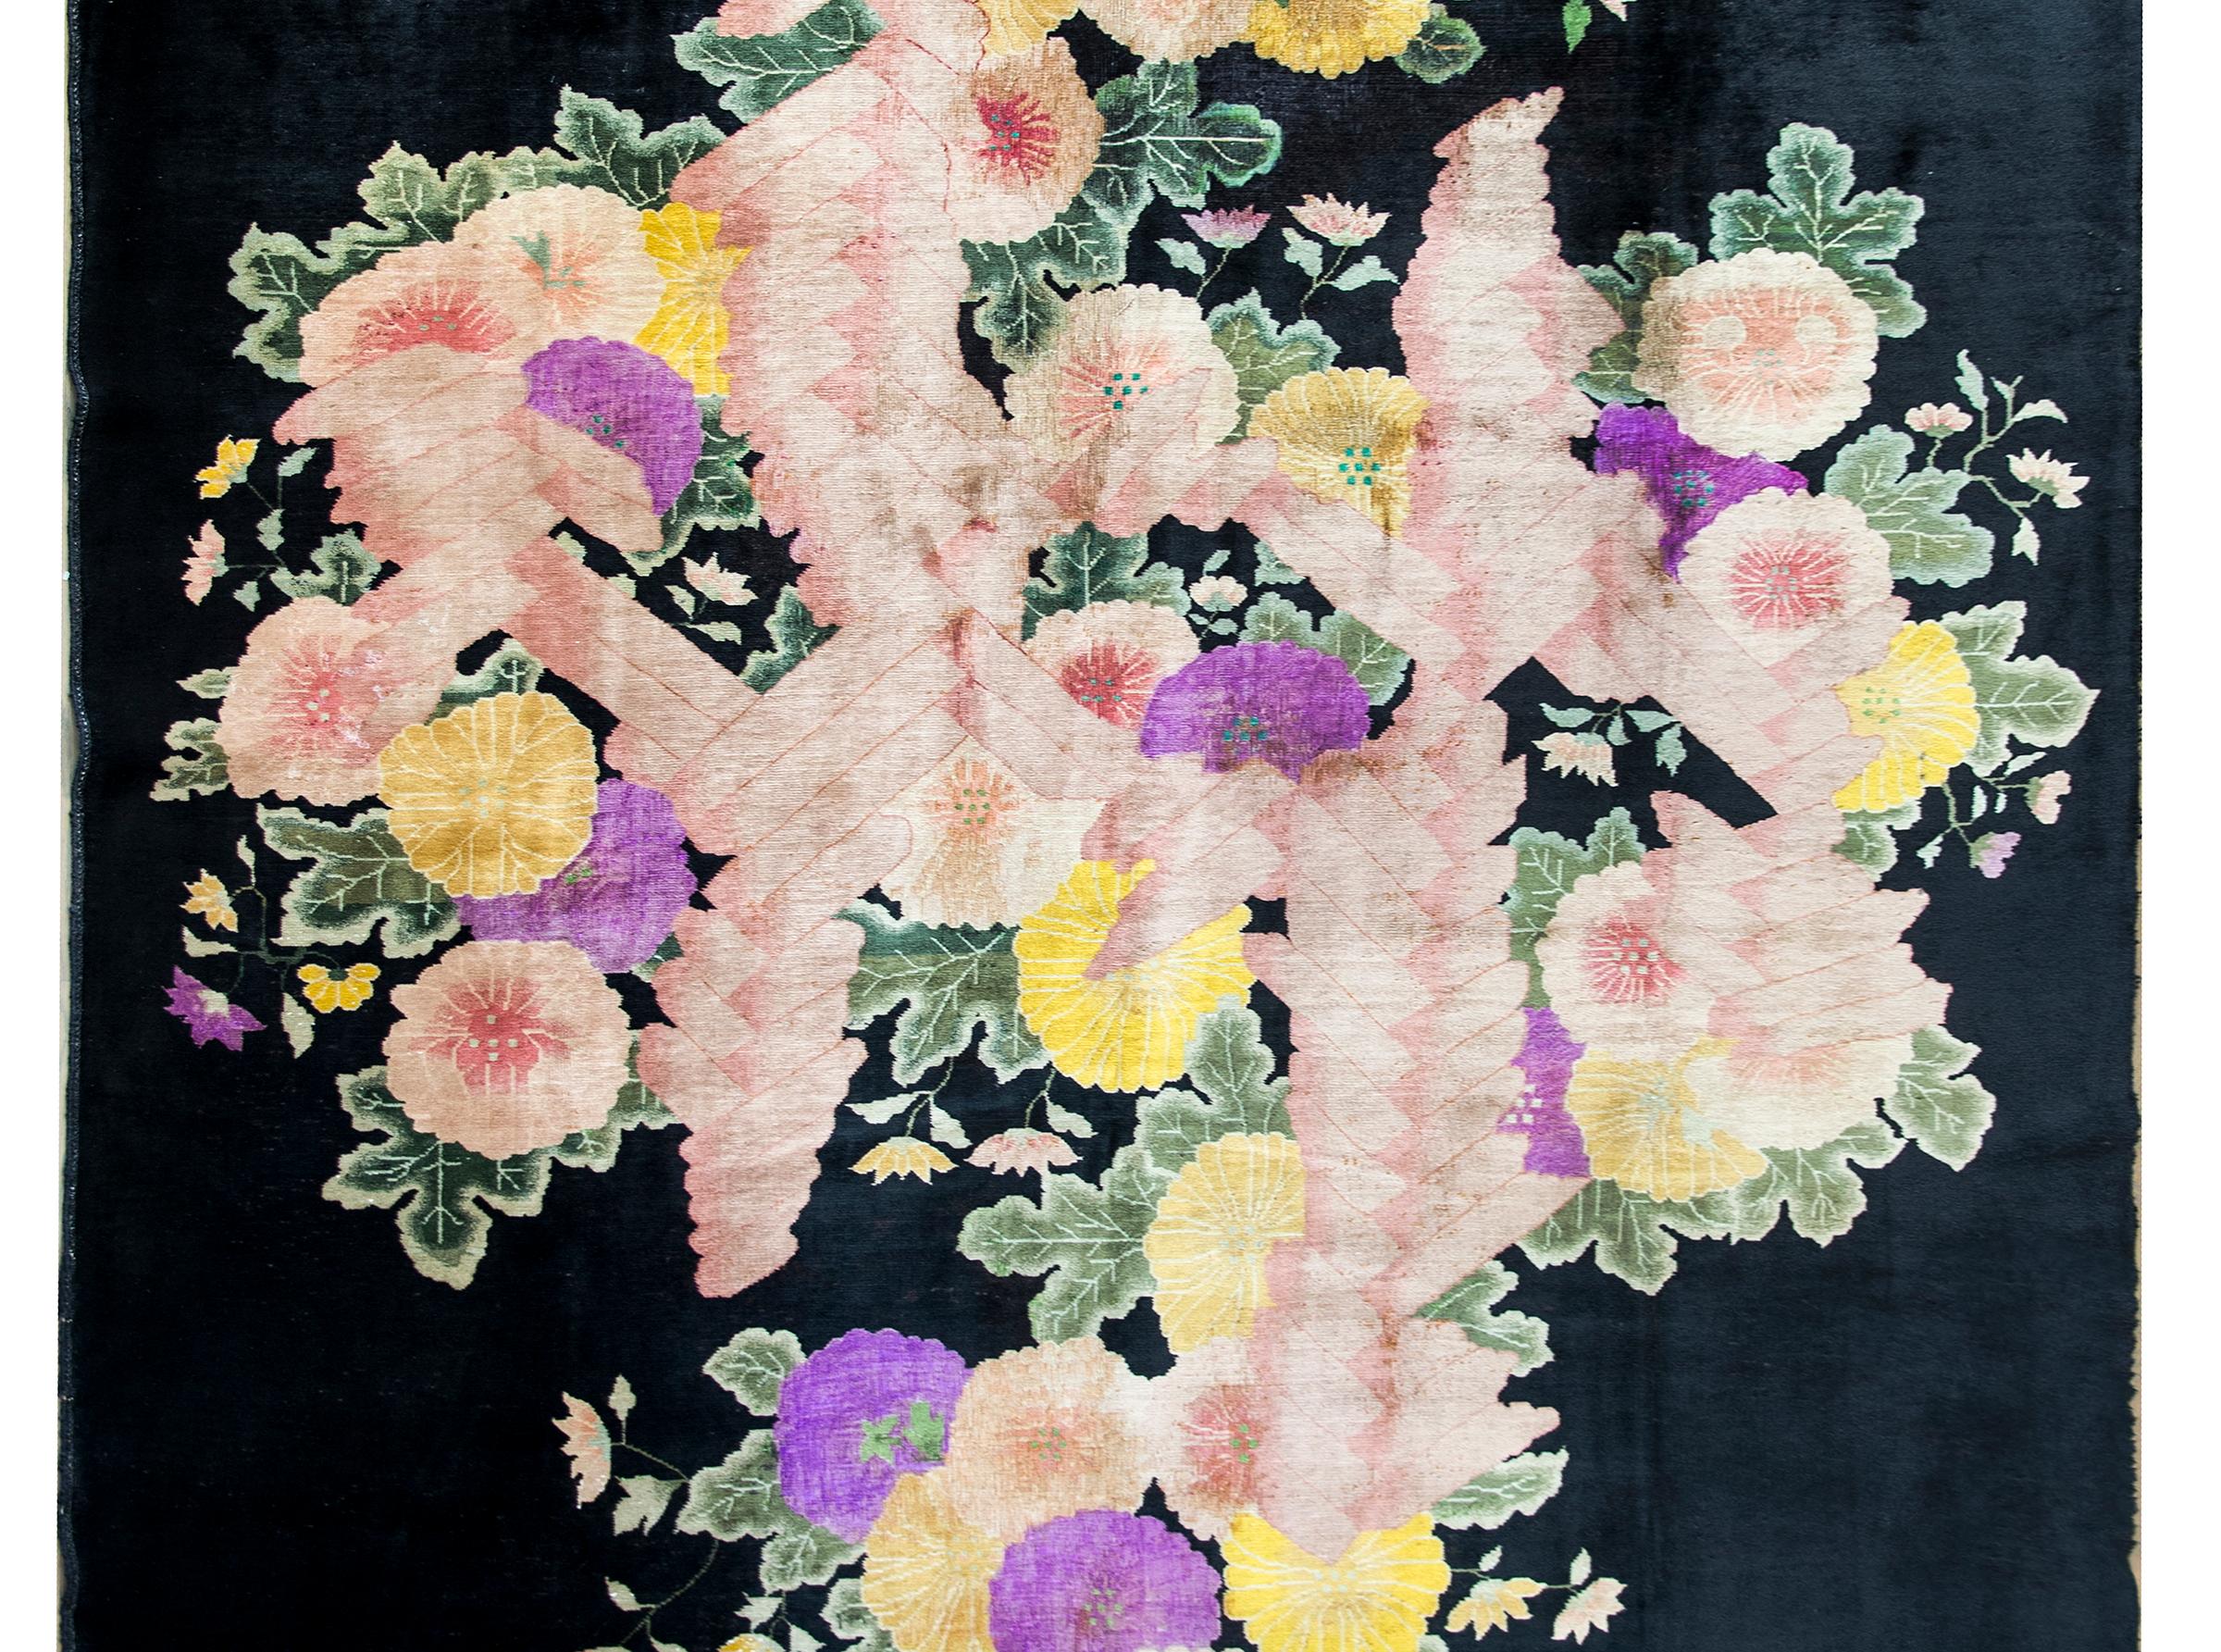 A chic and sophisticated early 20th century Chinese Art Deco rug with a black background with the most incredible large central peony and chrysanthemum cluster woven in gold, pink, and violet.